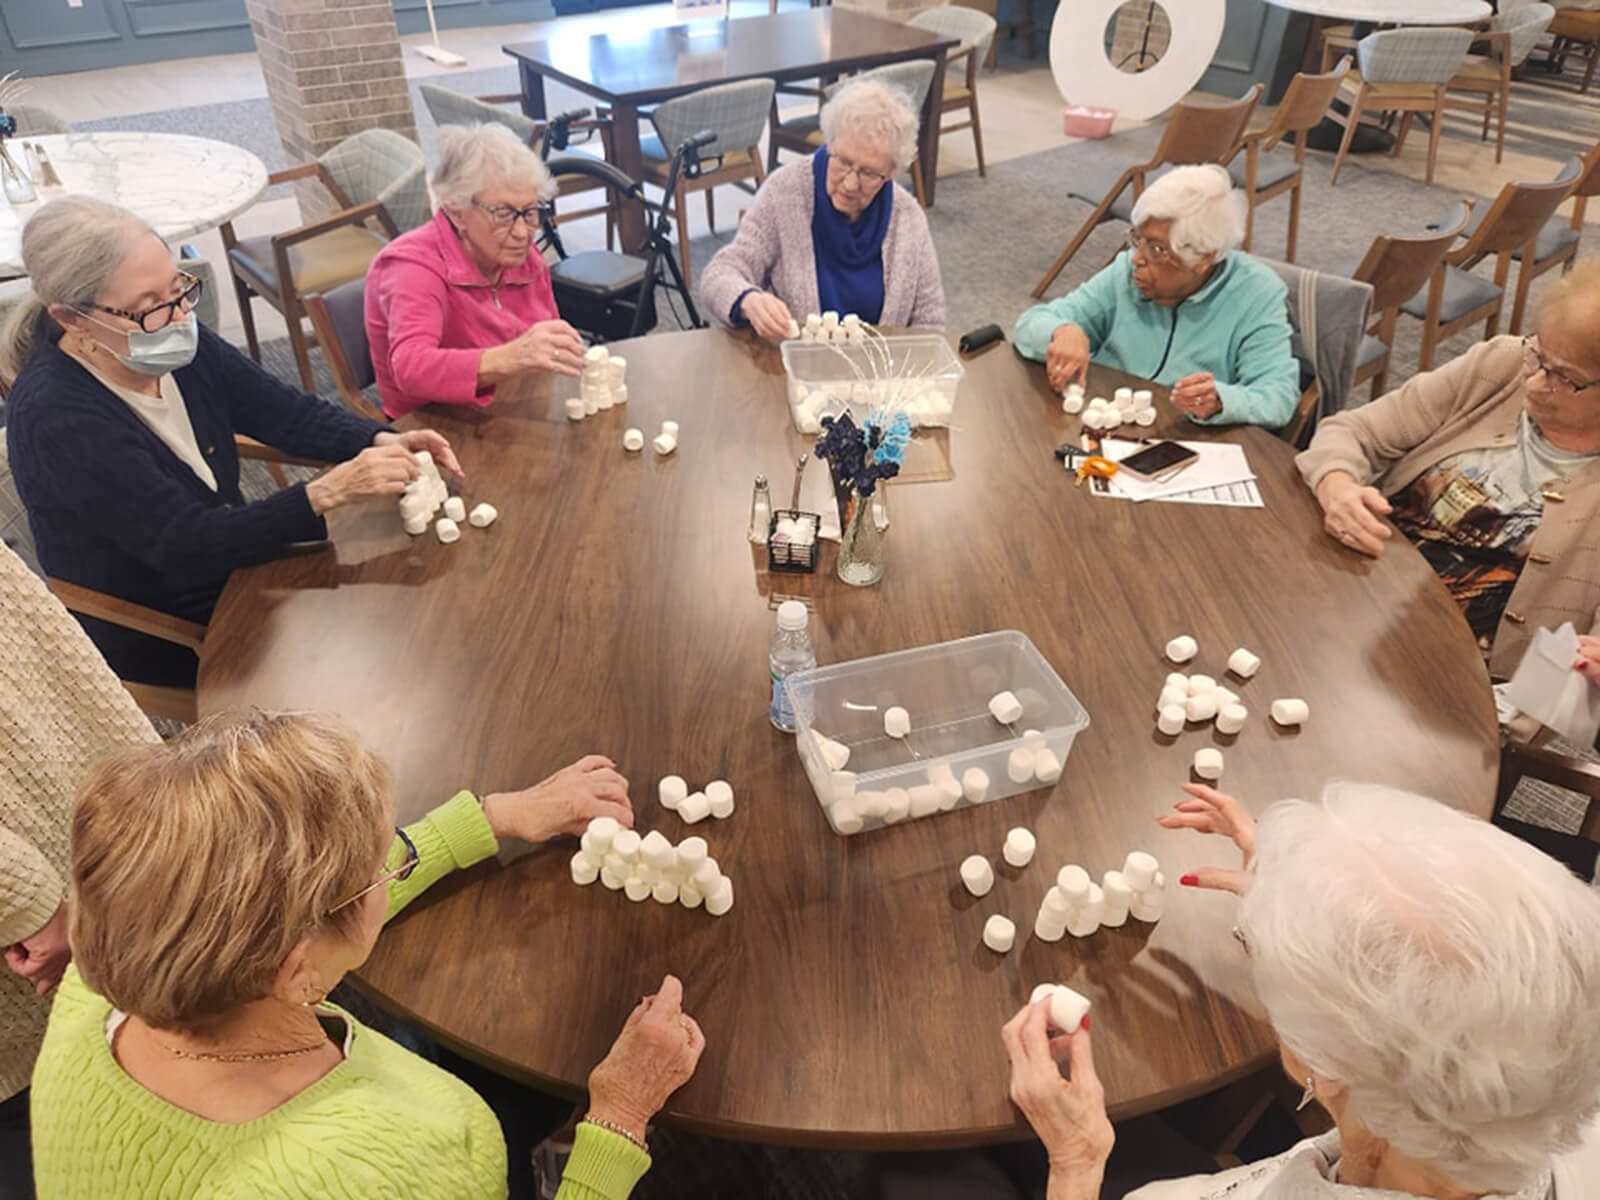 Residents of The Waters of Pewaukee participating in a marshmallow tower building game, encouraging teamwork and mental agility.